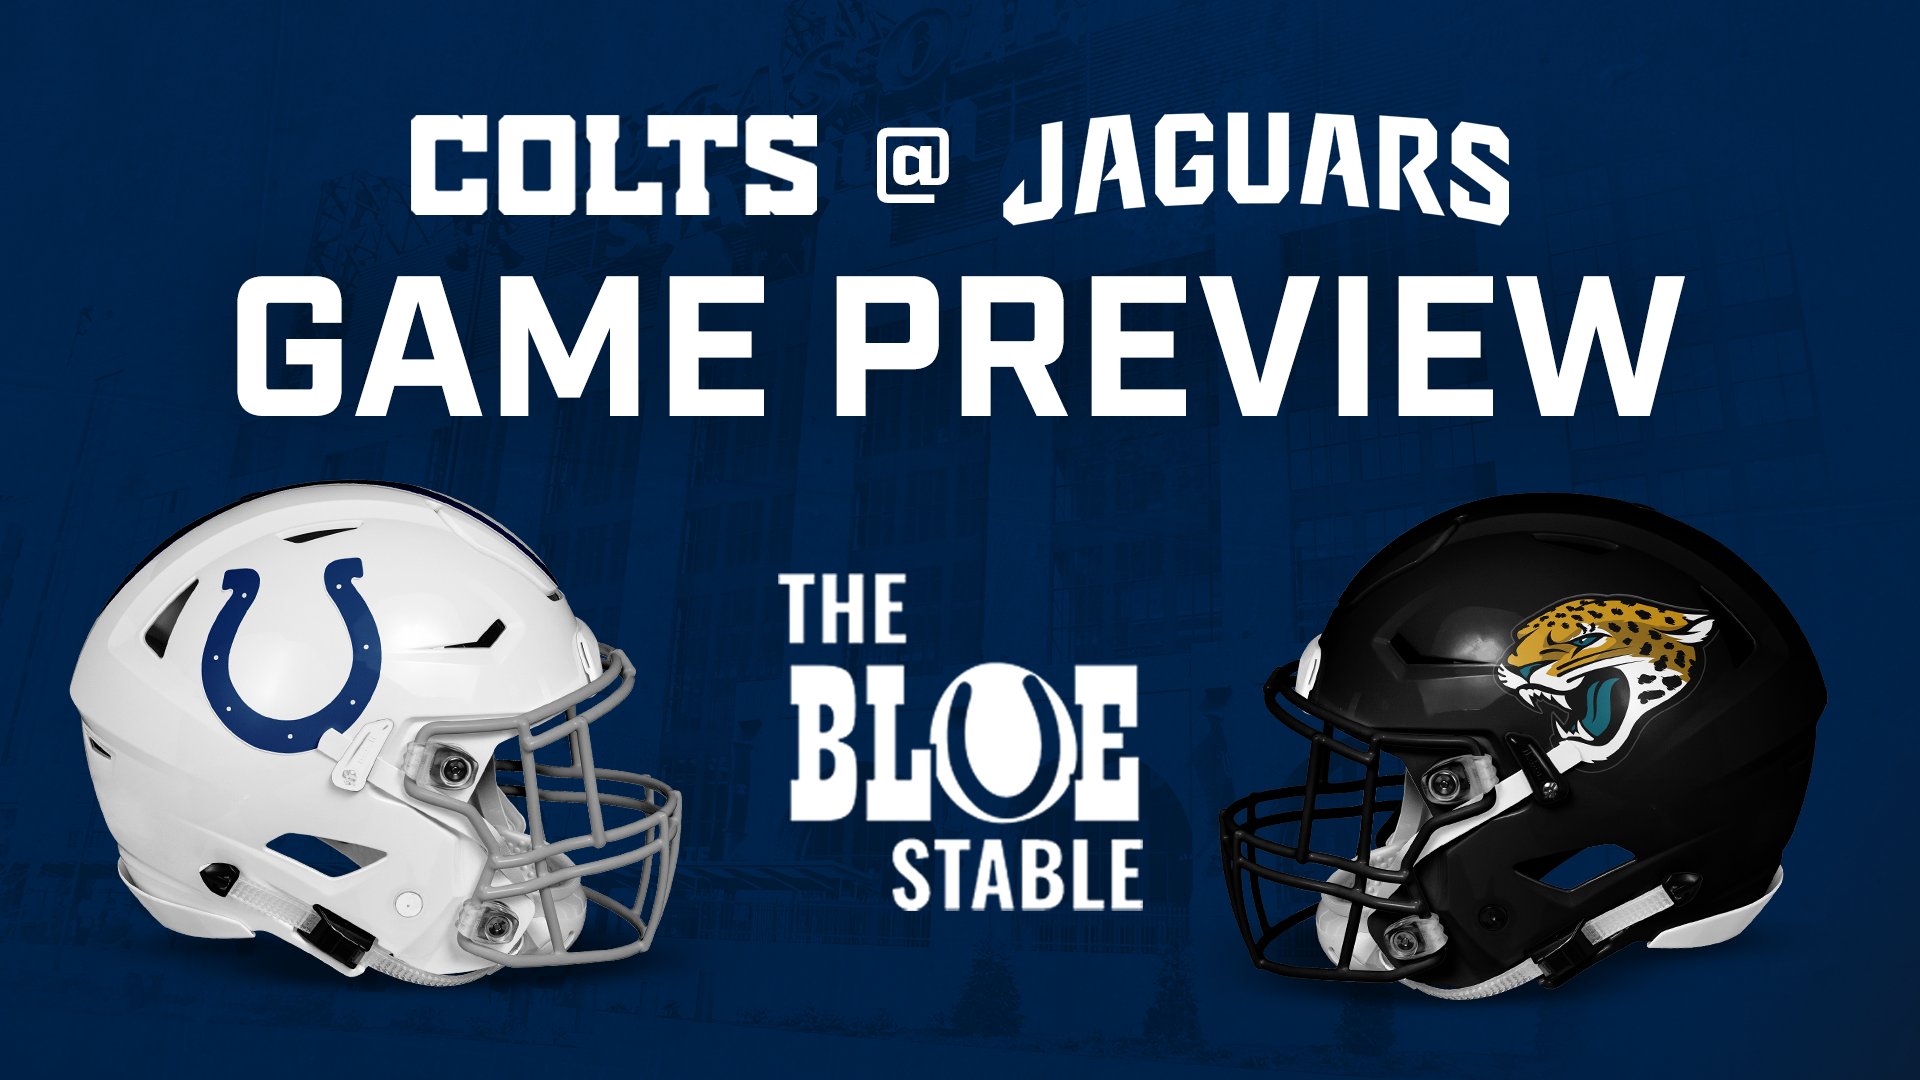 Colts @ Jaguars Game Preview